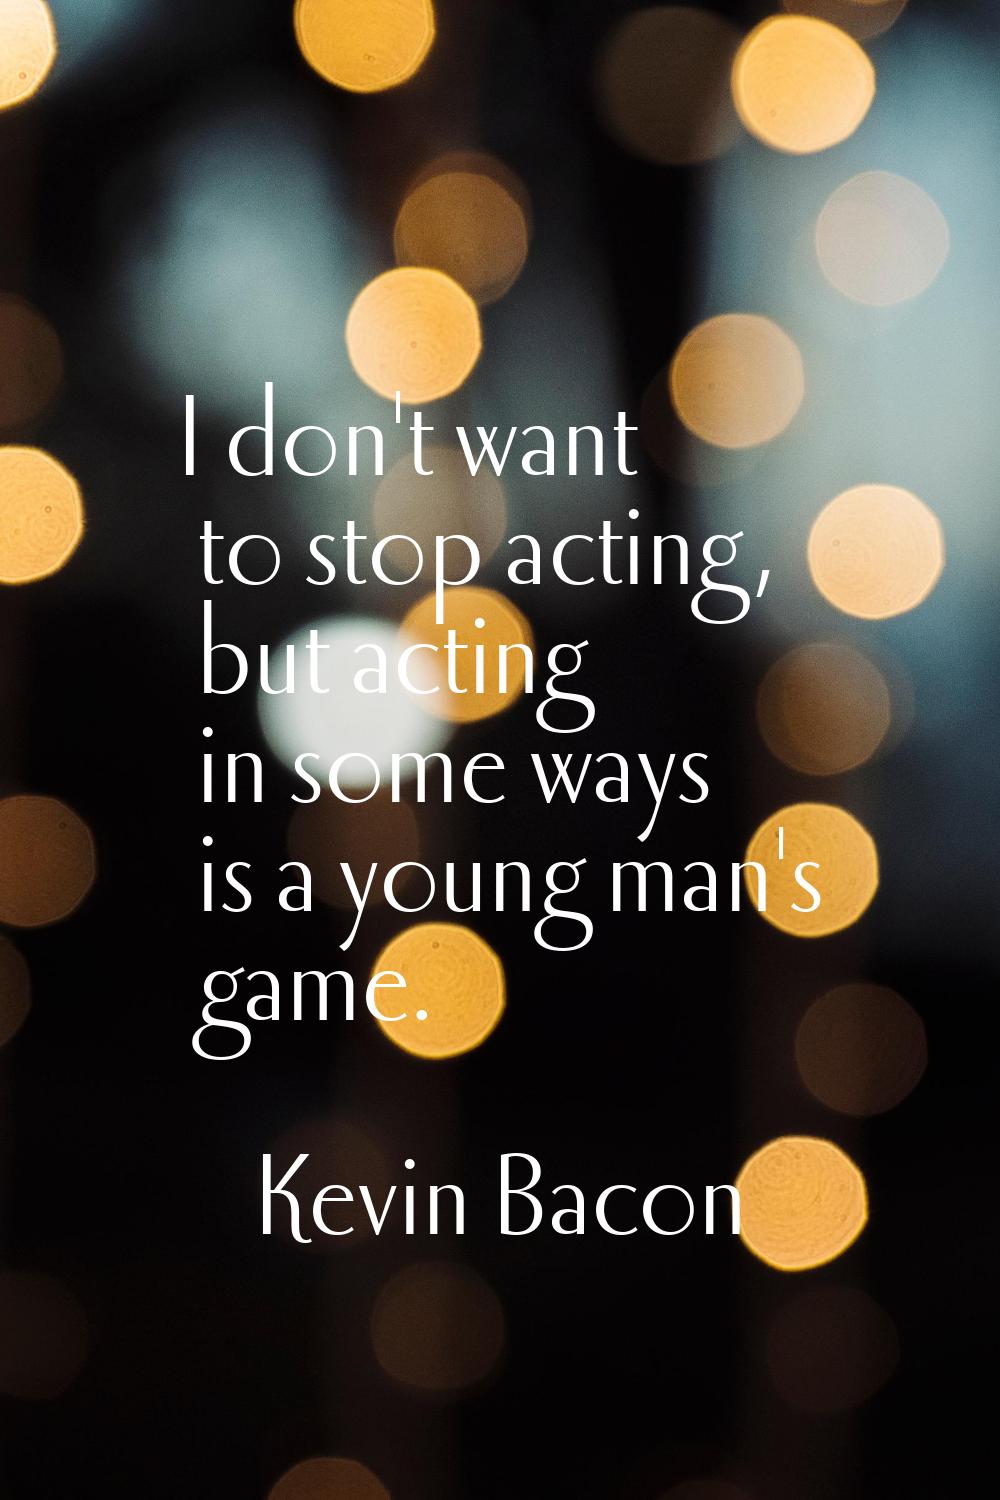 I don't want to stop acting, but acting in some ways is a young man's game.